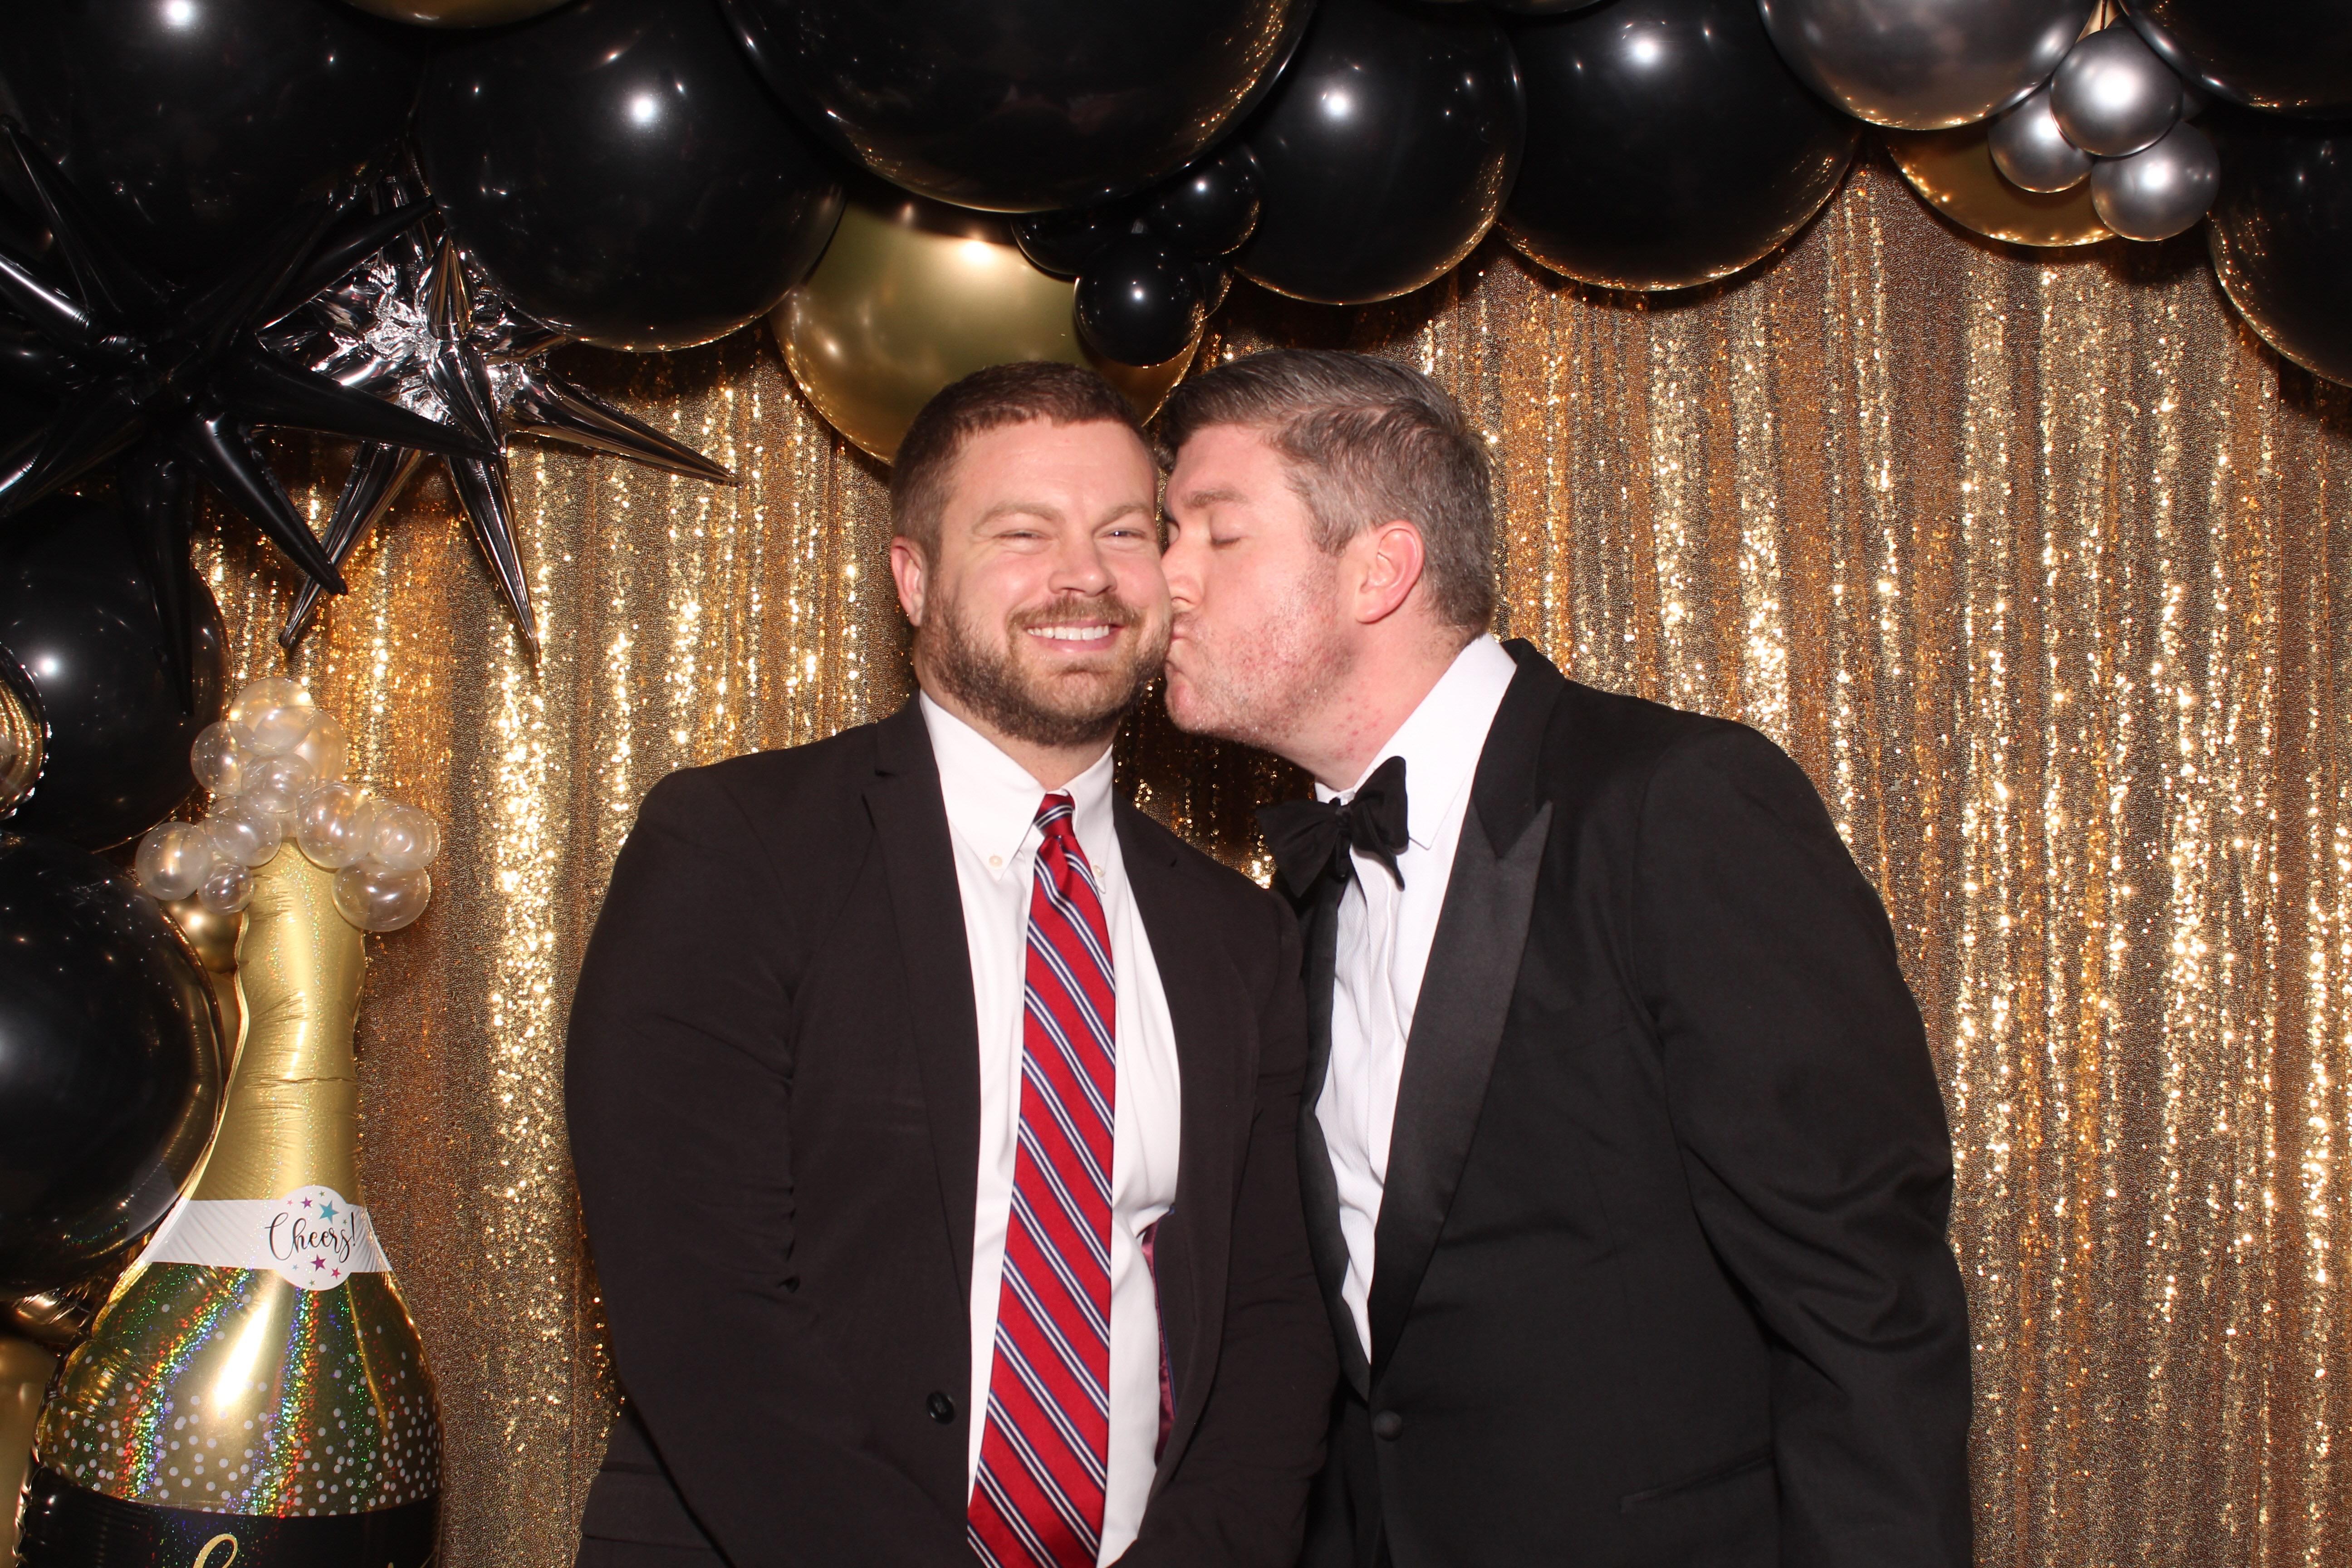 The Wedding Website of DJ Judd and Brian Walsh